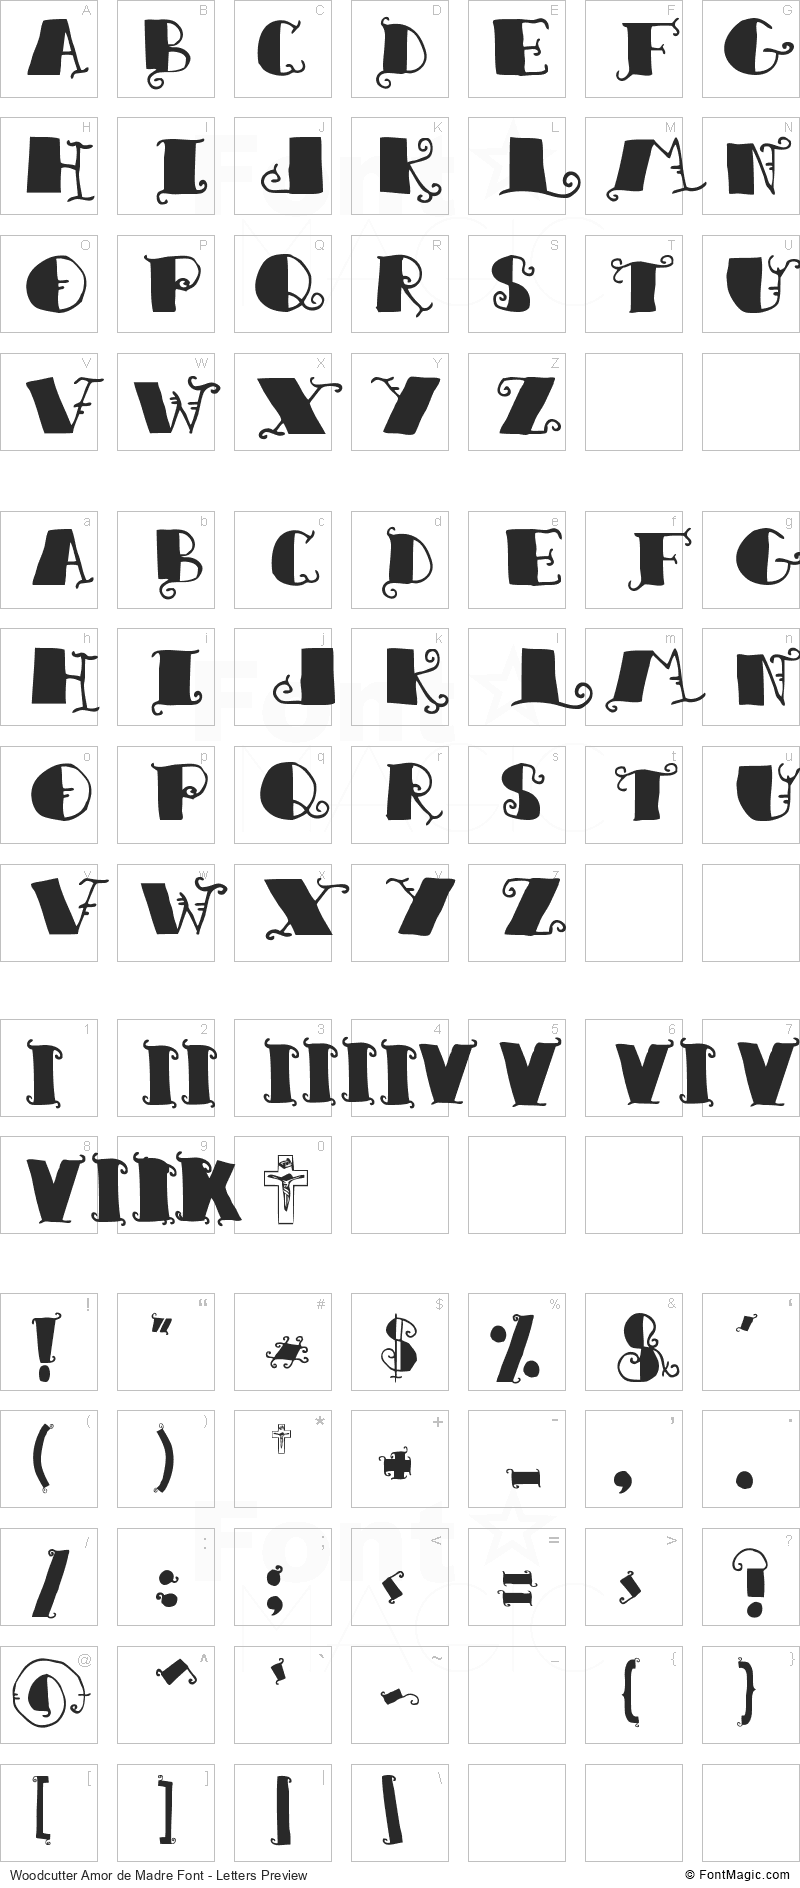 Woodcutter Amor de Madre Font - All Latters Preview Chart